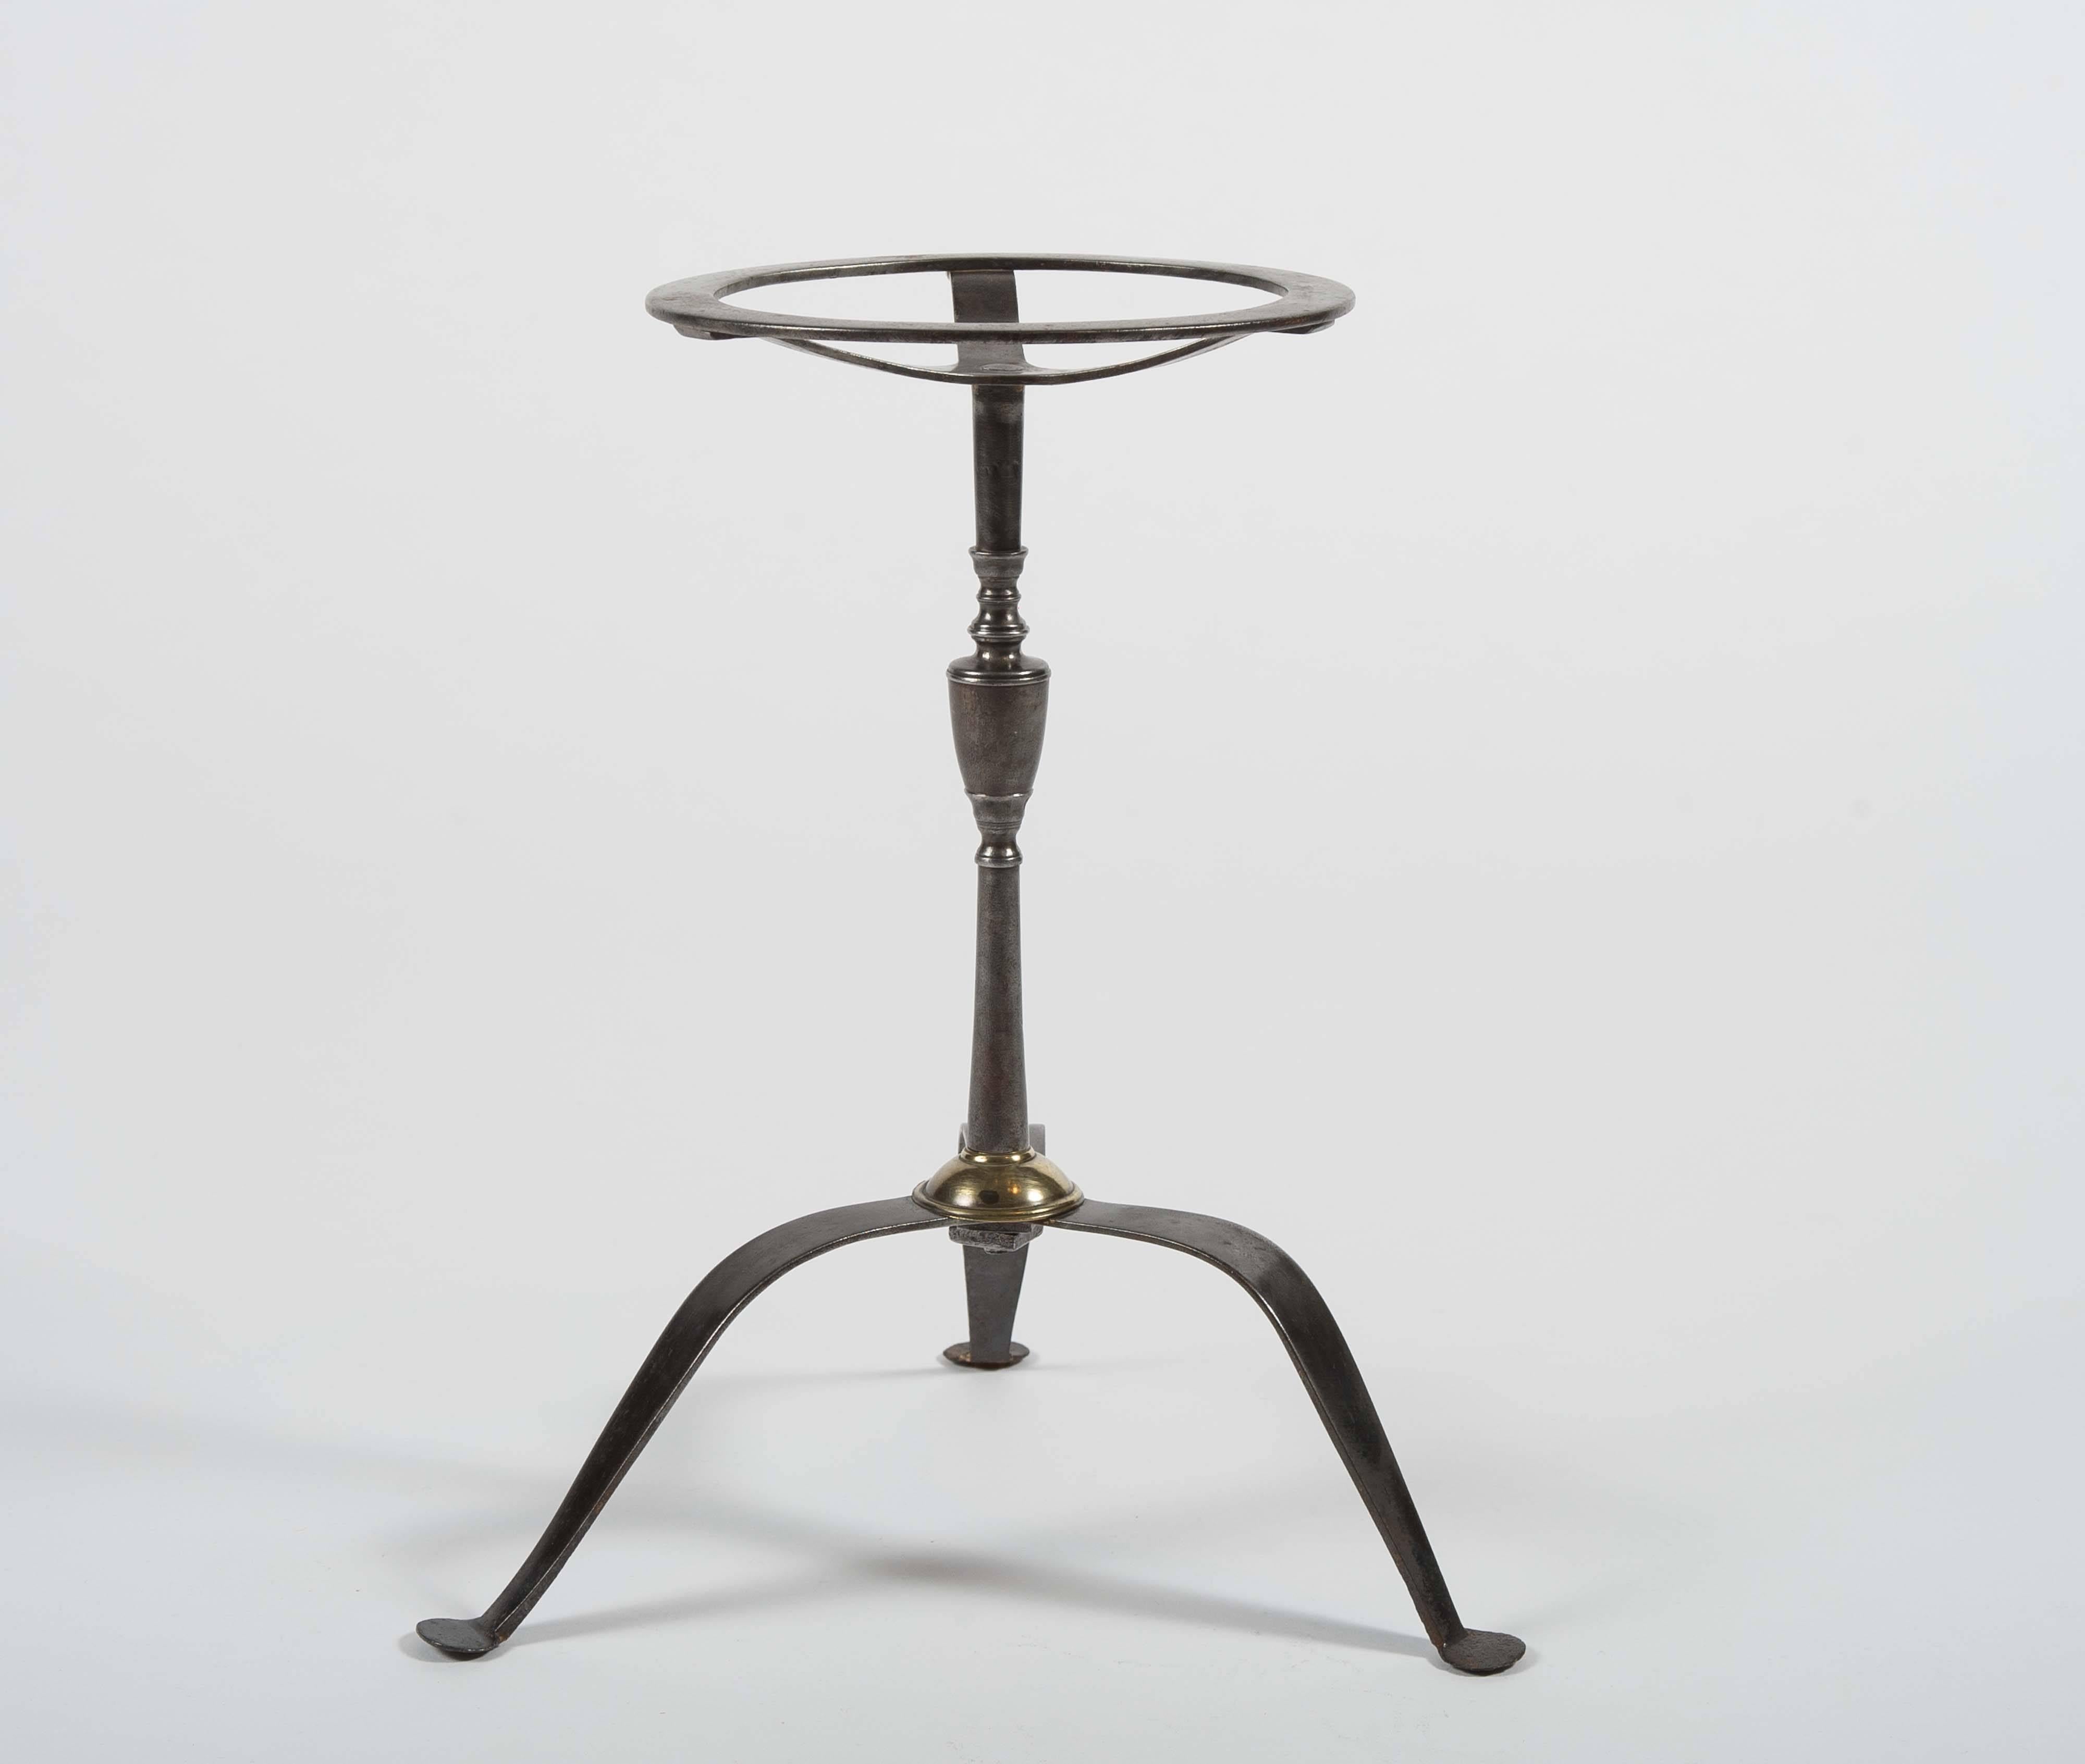 English George III Period Steel Trivet with Turned “Vase” Stem and Pierced Circular Top For Sale